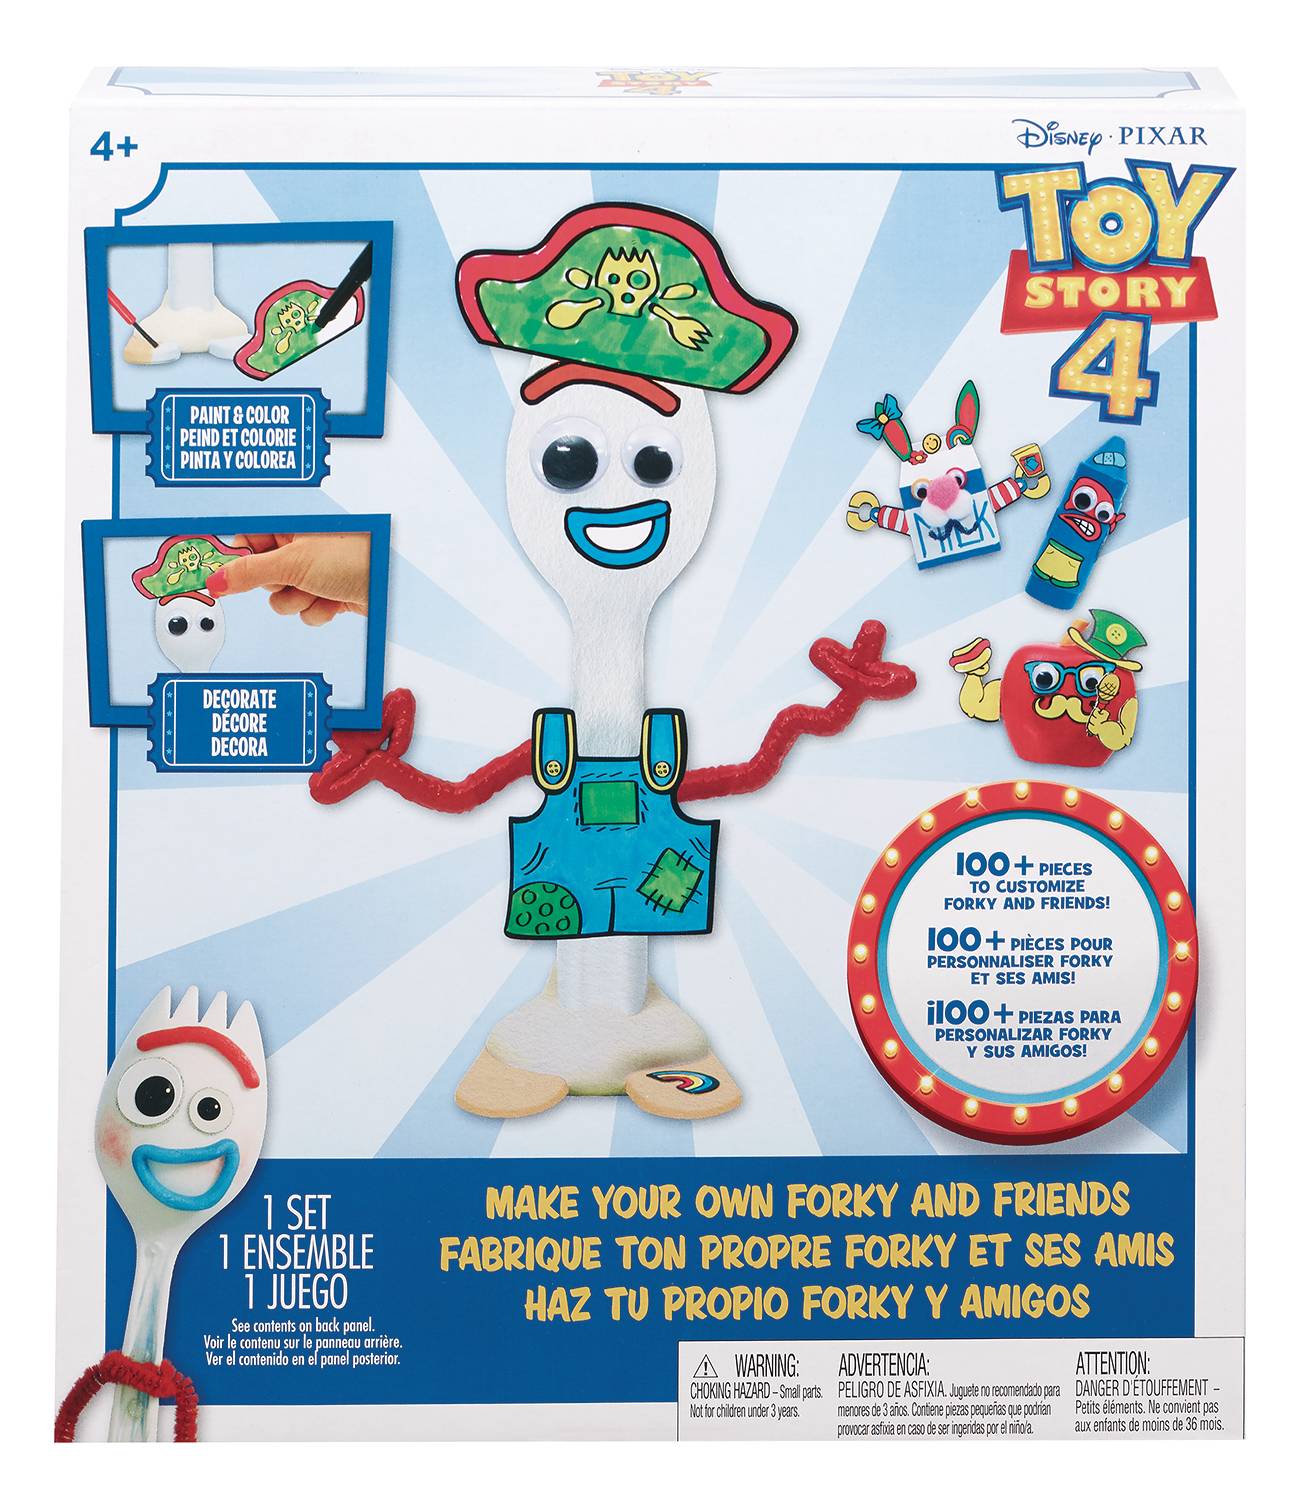 Forky Disney Pixar Toy Story 4 Make Your Own Forky Kit Creative